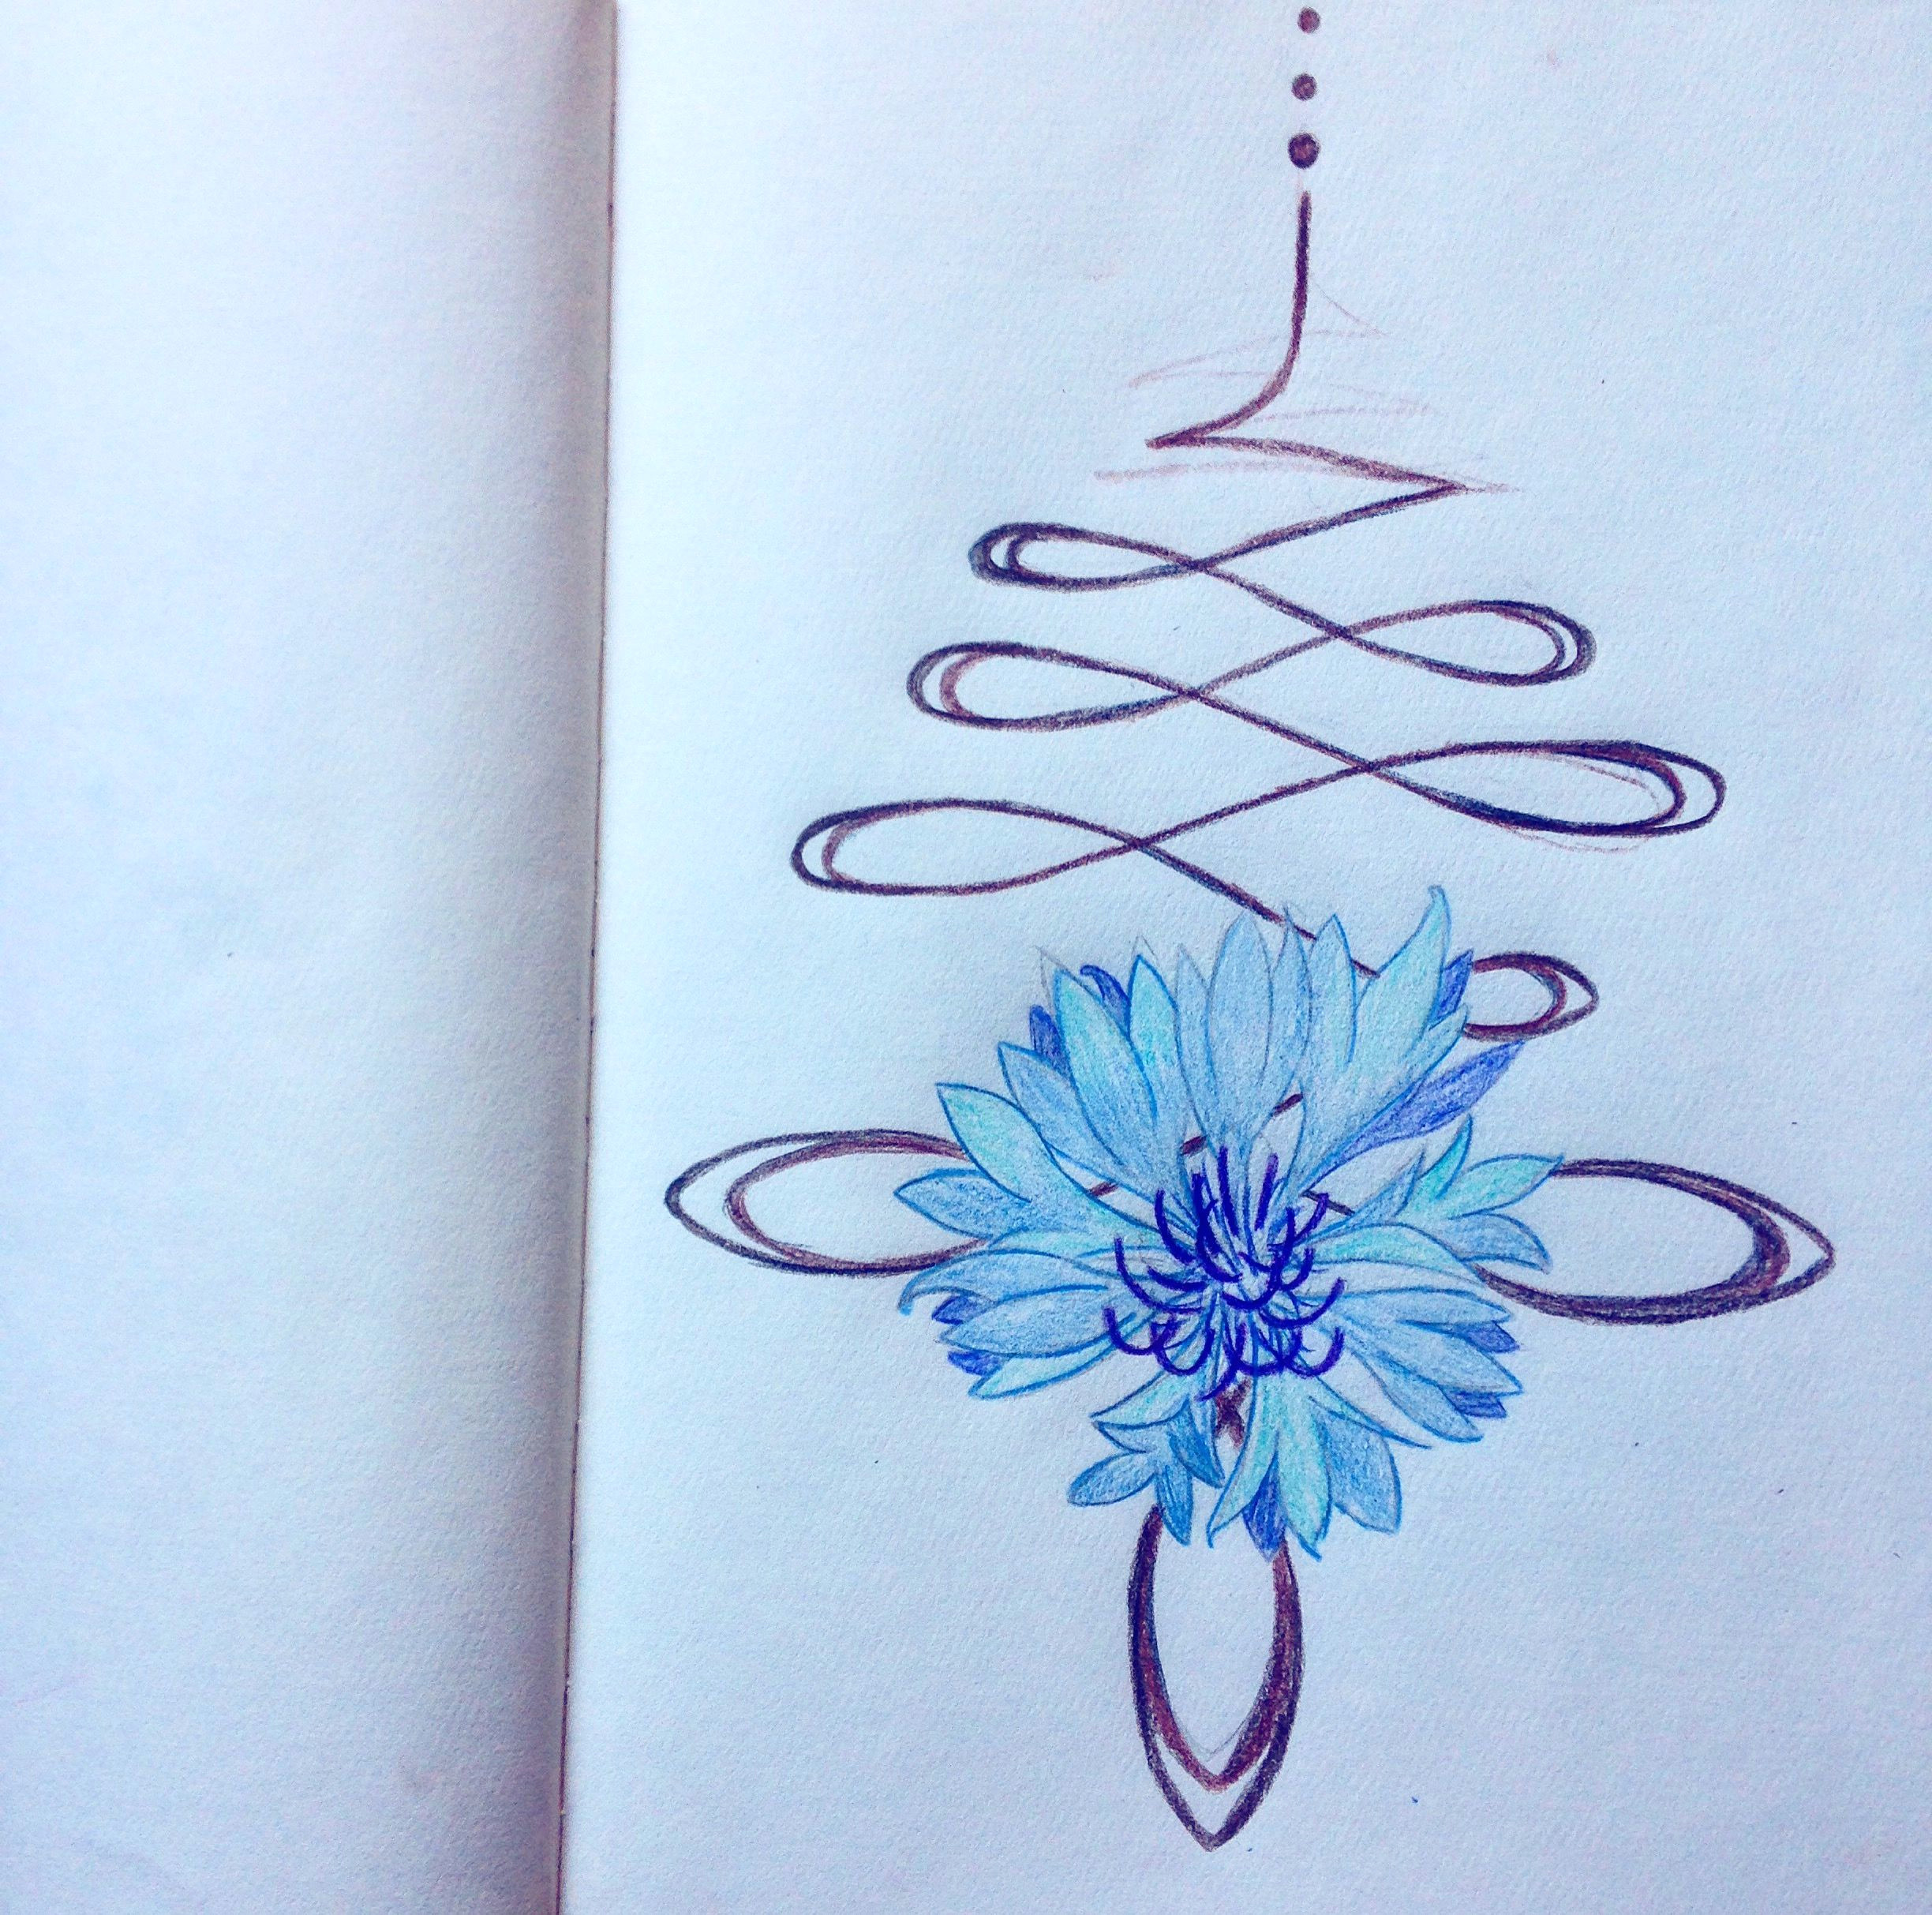 Drawings Of Corn Flower Tattoo Doodle by Me Cornflower and Unalome Combination Tattoo Just